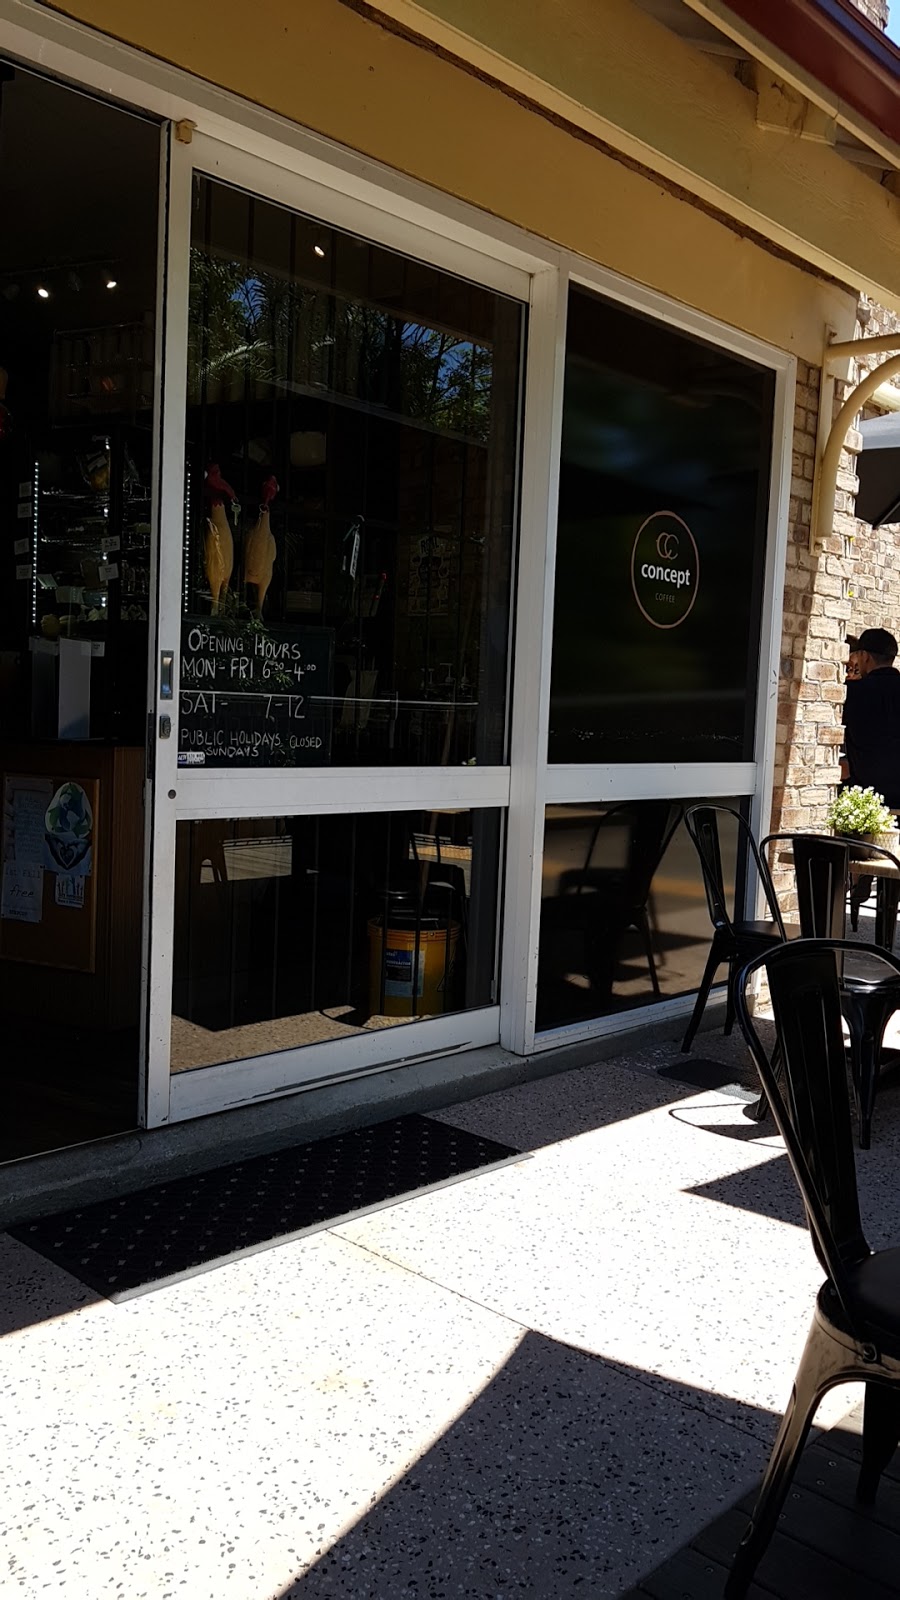 Concept Coffee | cafe | Shop 6 2, Riverside Centre, 4 Maple St, Maleny QLD 4552, Australia | 0753702906 OR +61 7 5370 2906